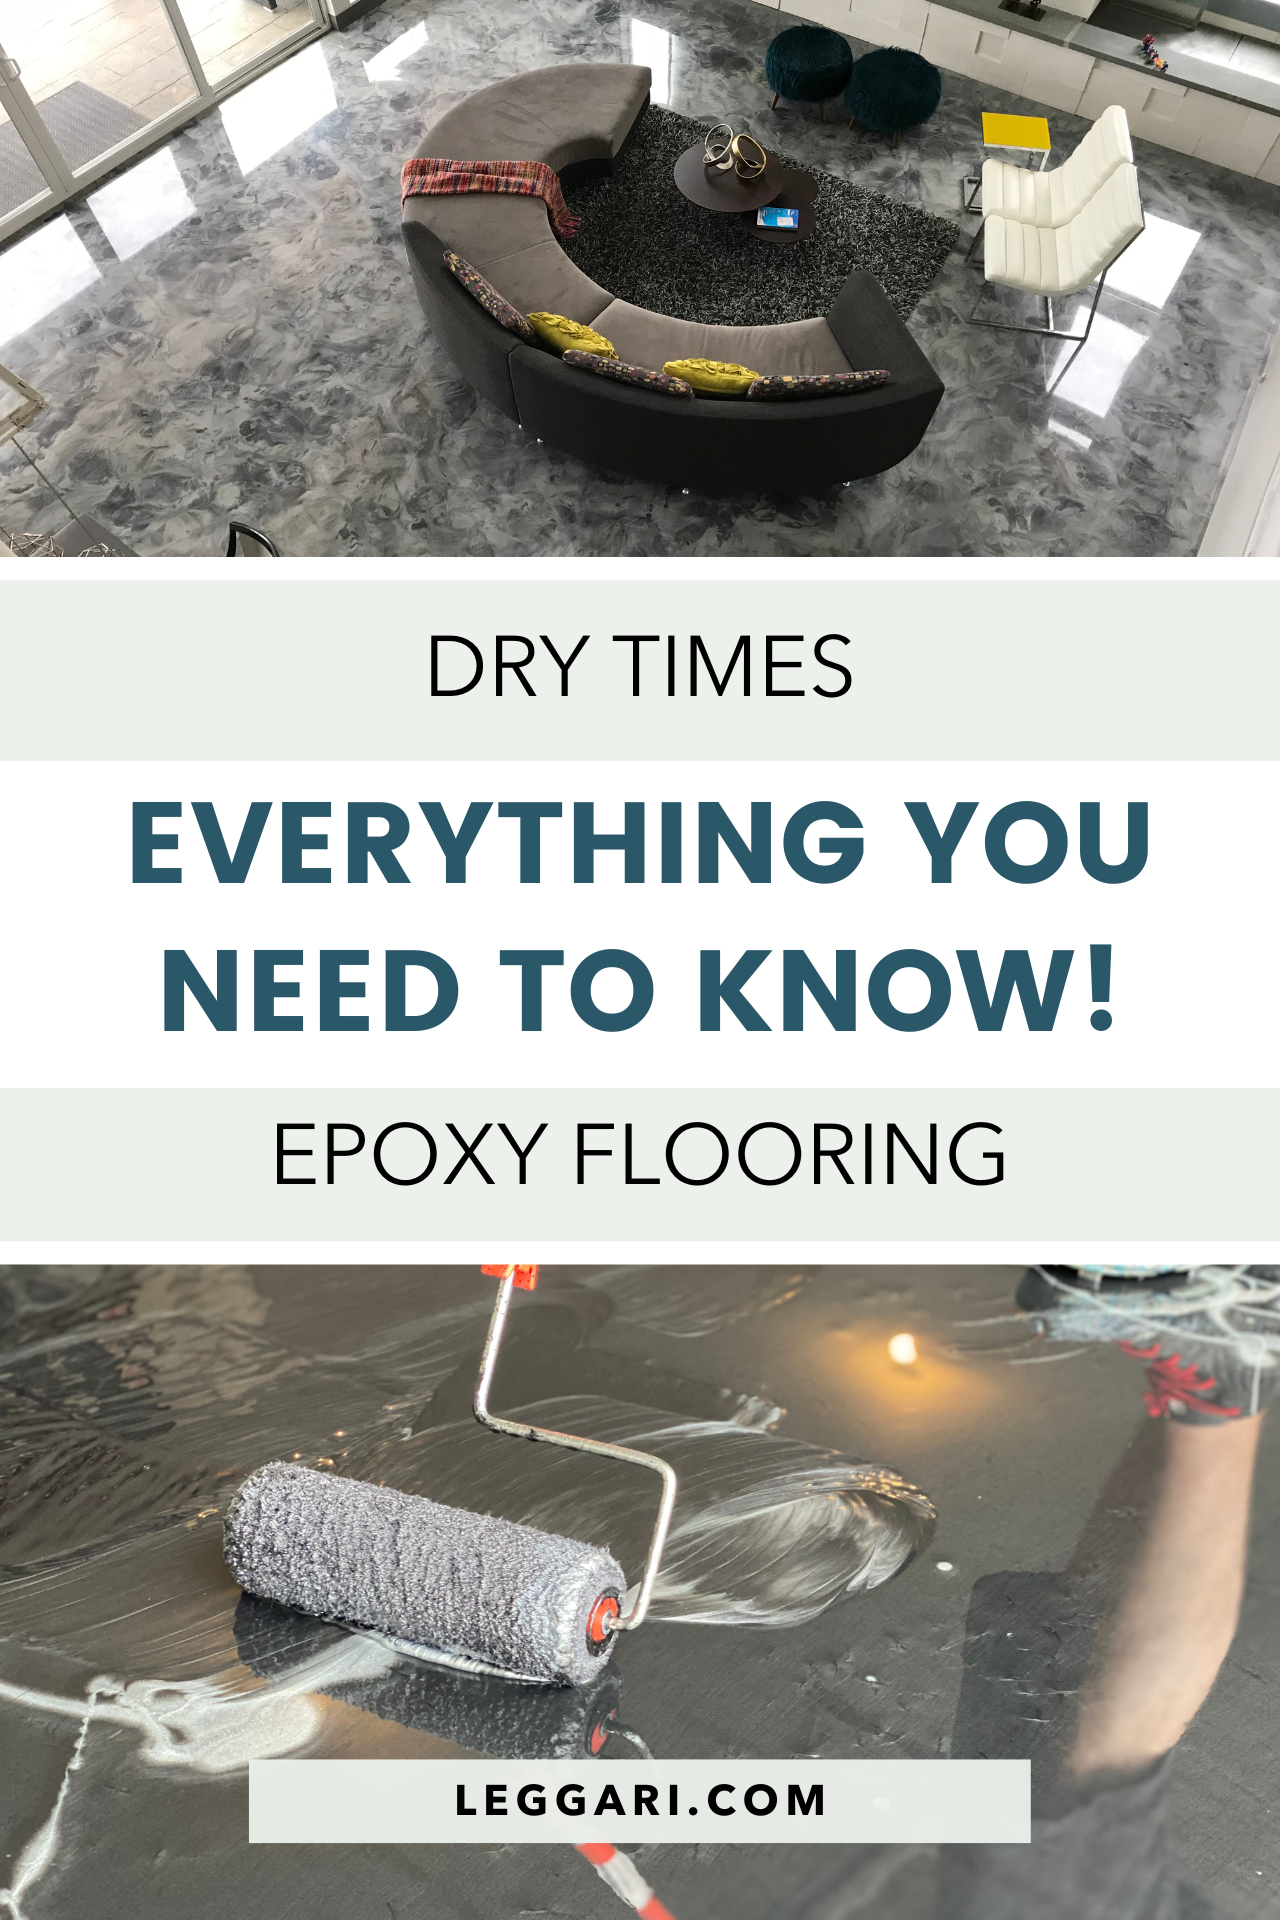 Epoxy Flooring Dry time - Everything you need to know